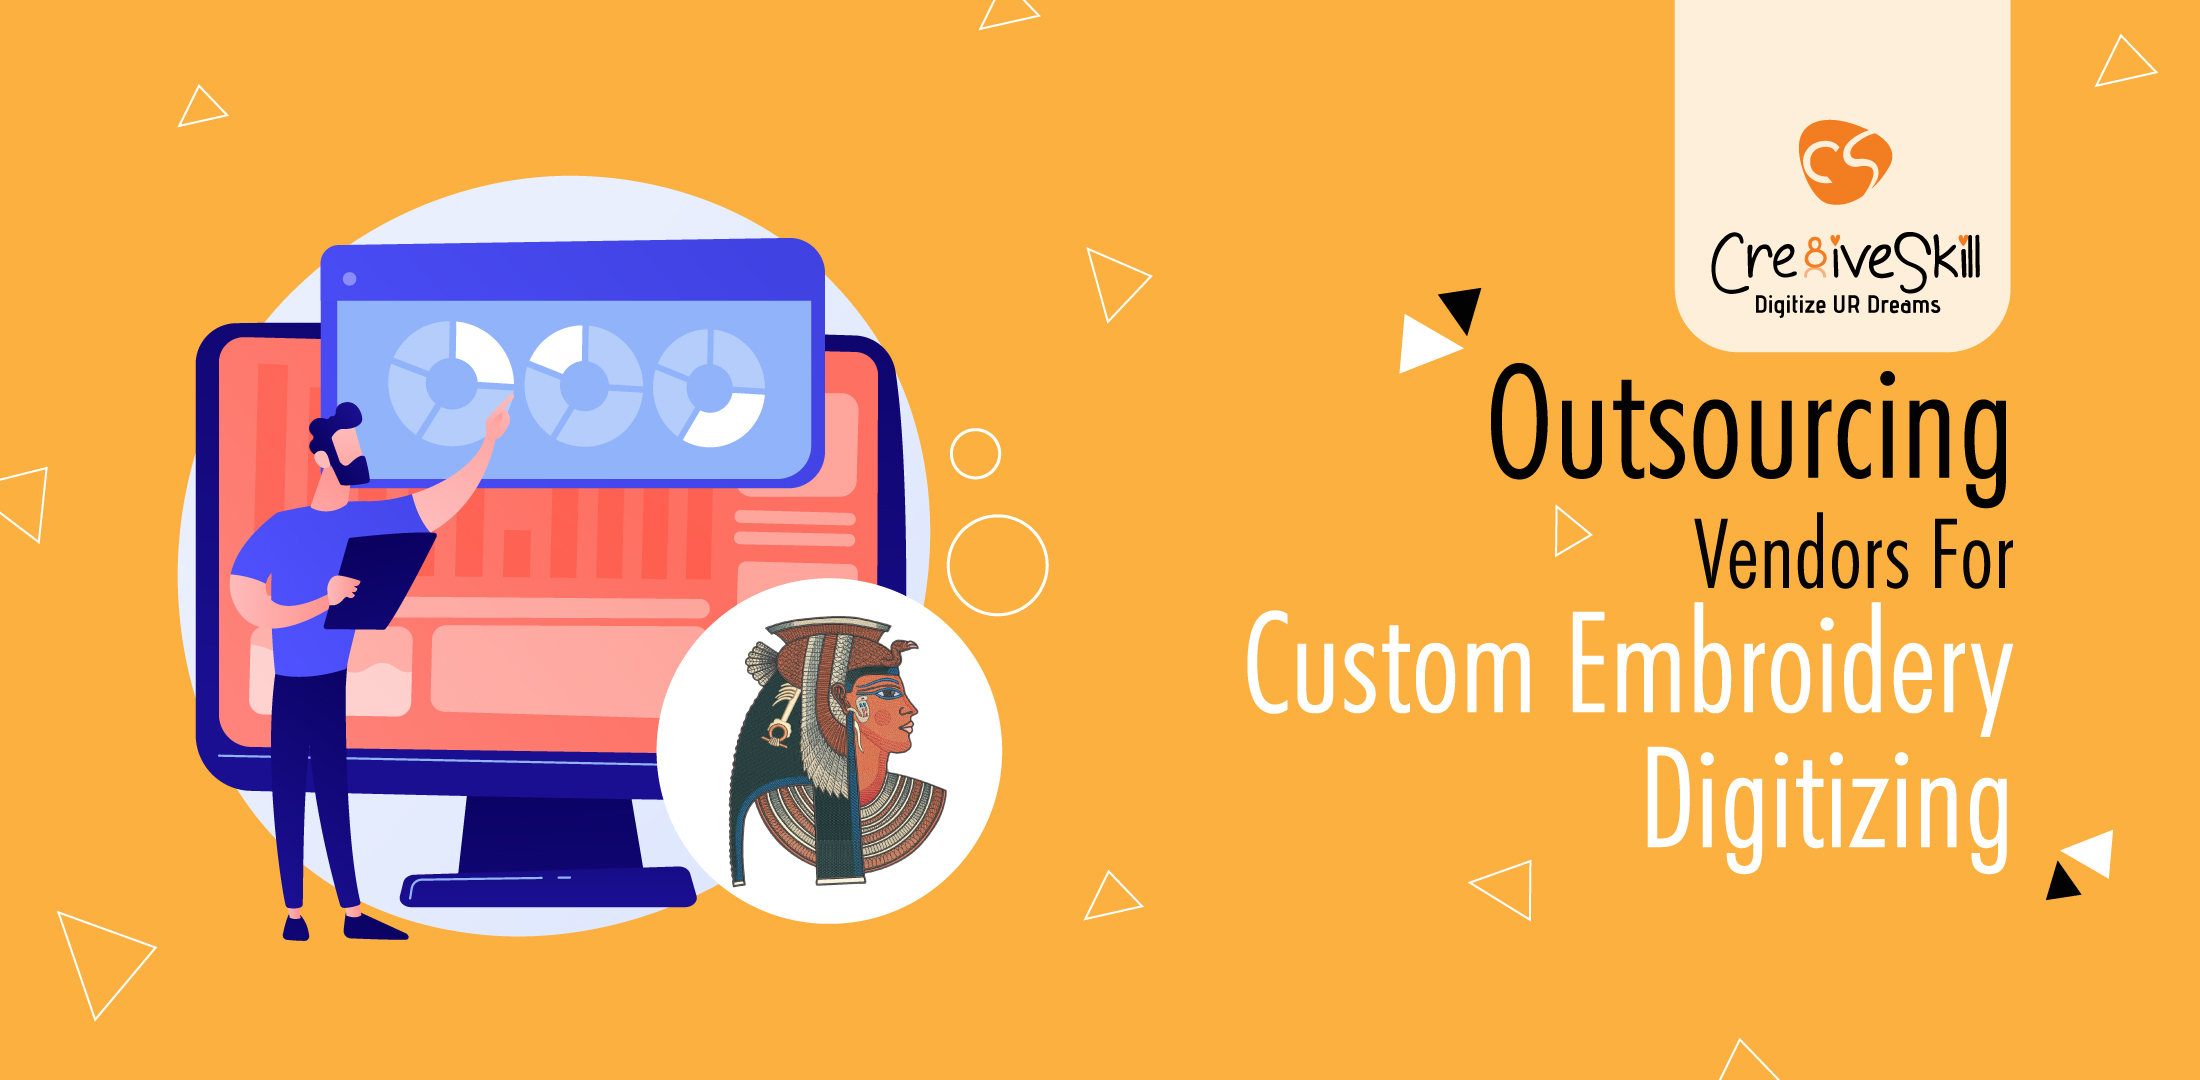 Benefits Of Outsourcing Vendors For Custom Embroidery Digitizing | Cre8iveSkill